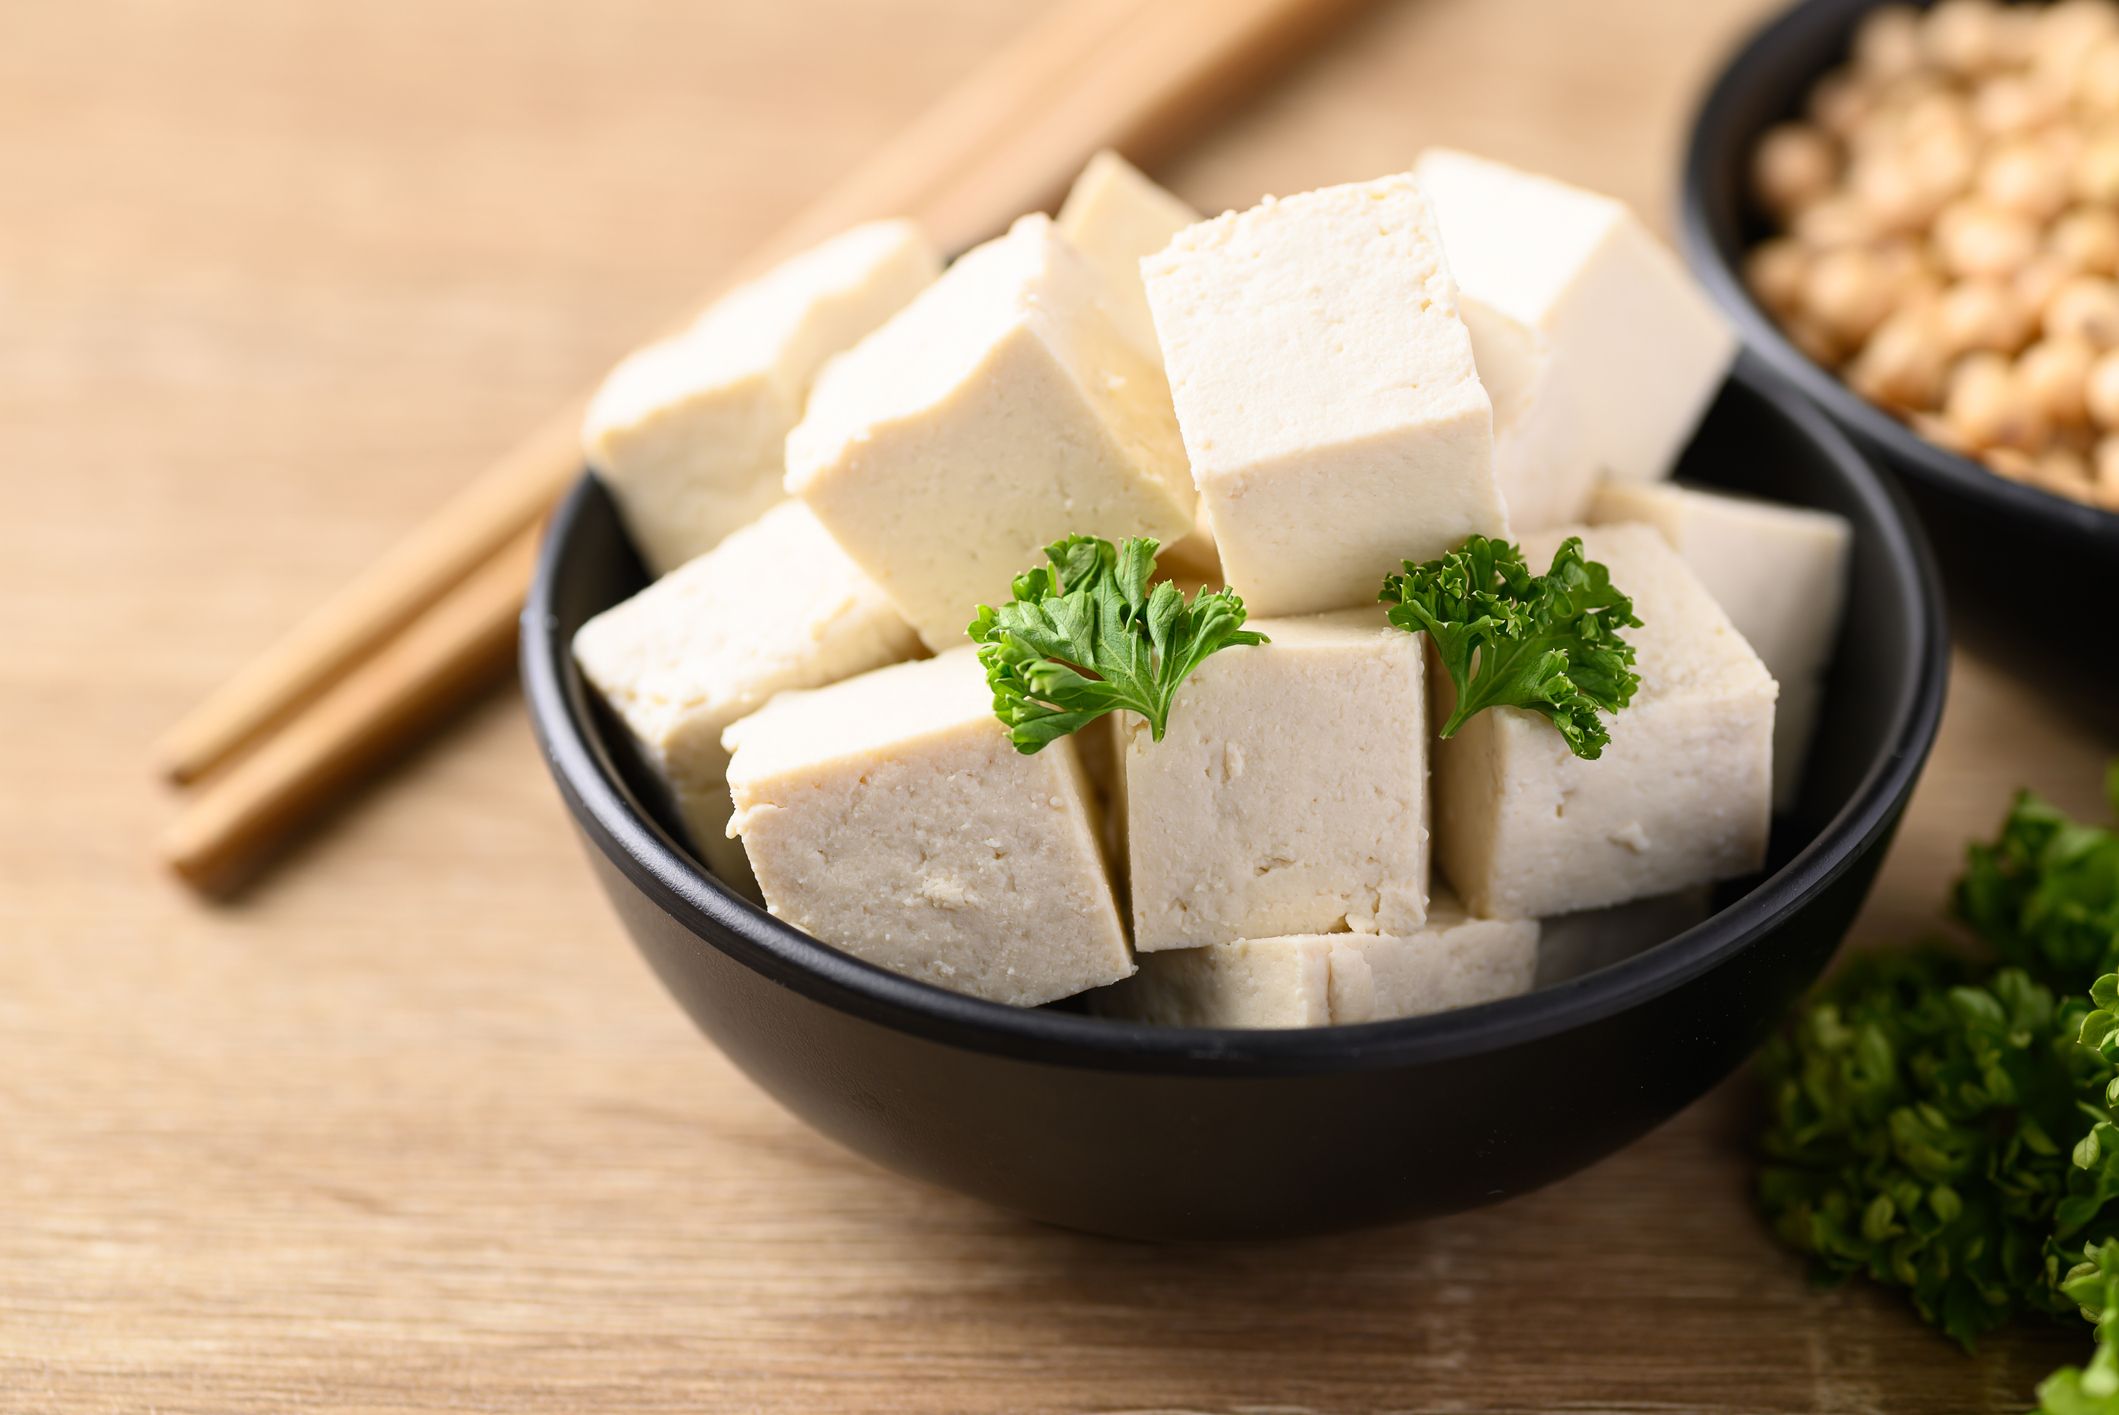 https://hips.hearstapps.com/hmg-prod/images/homemade-tofu-with-soybean-seed-vegan-food-royalty-free-image-1687372677.jpg